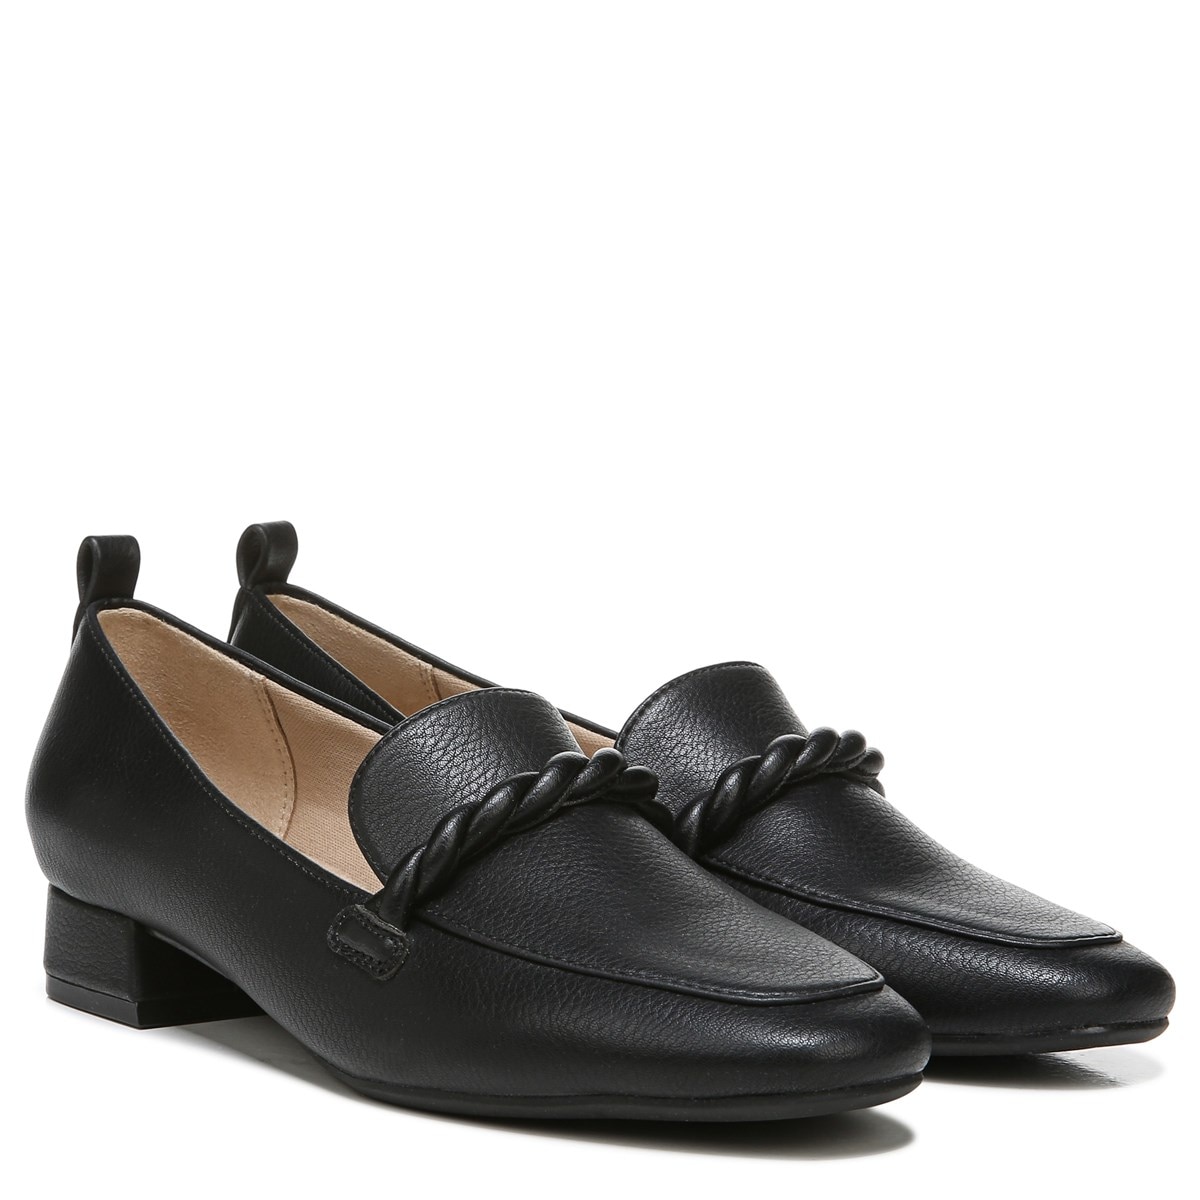 Confident Loafer - Pair